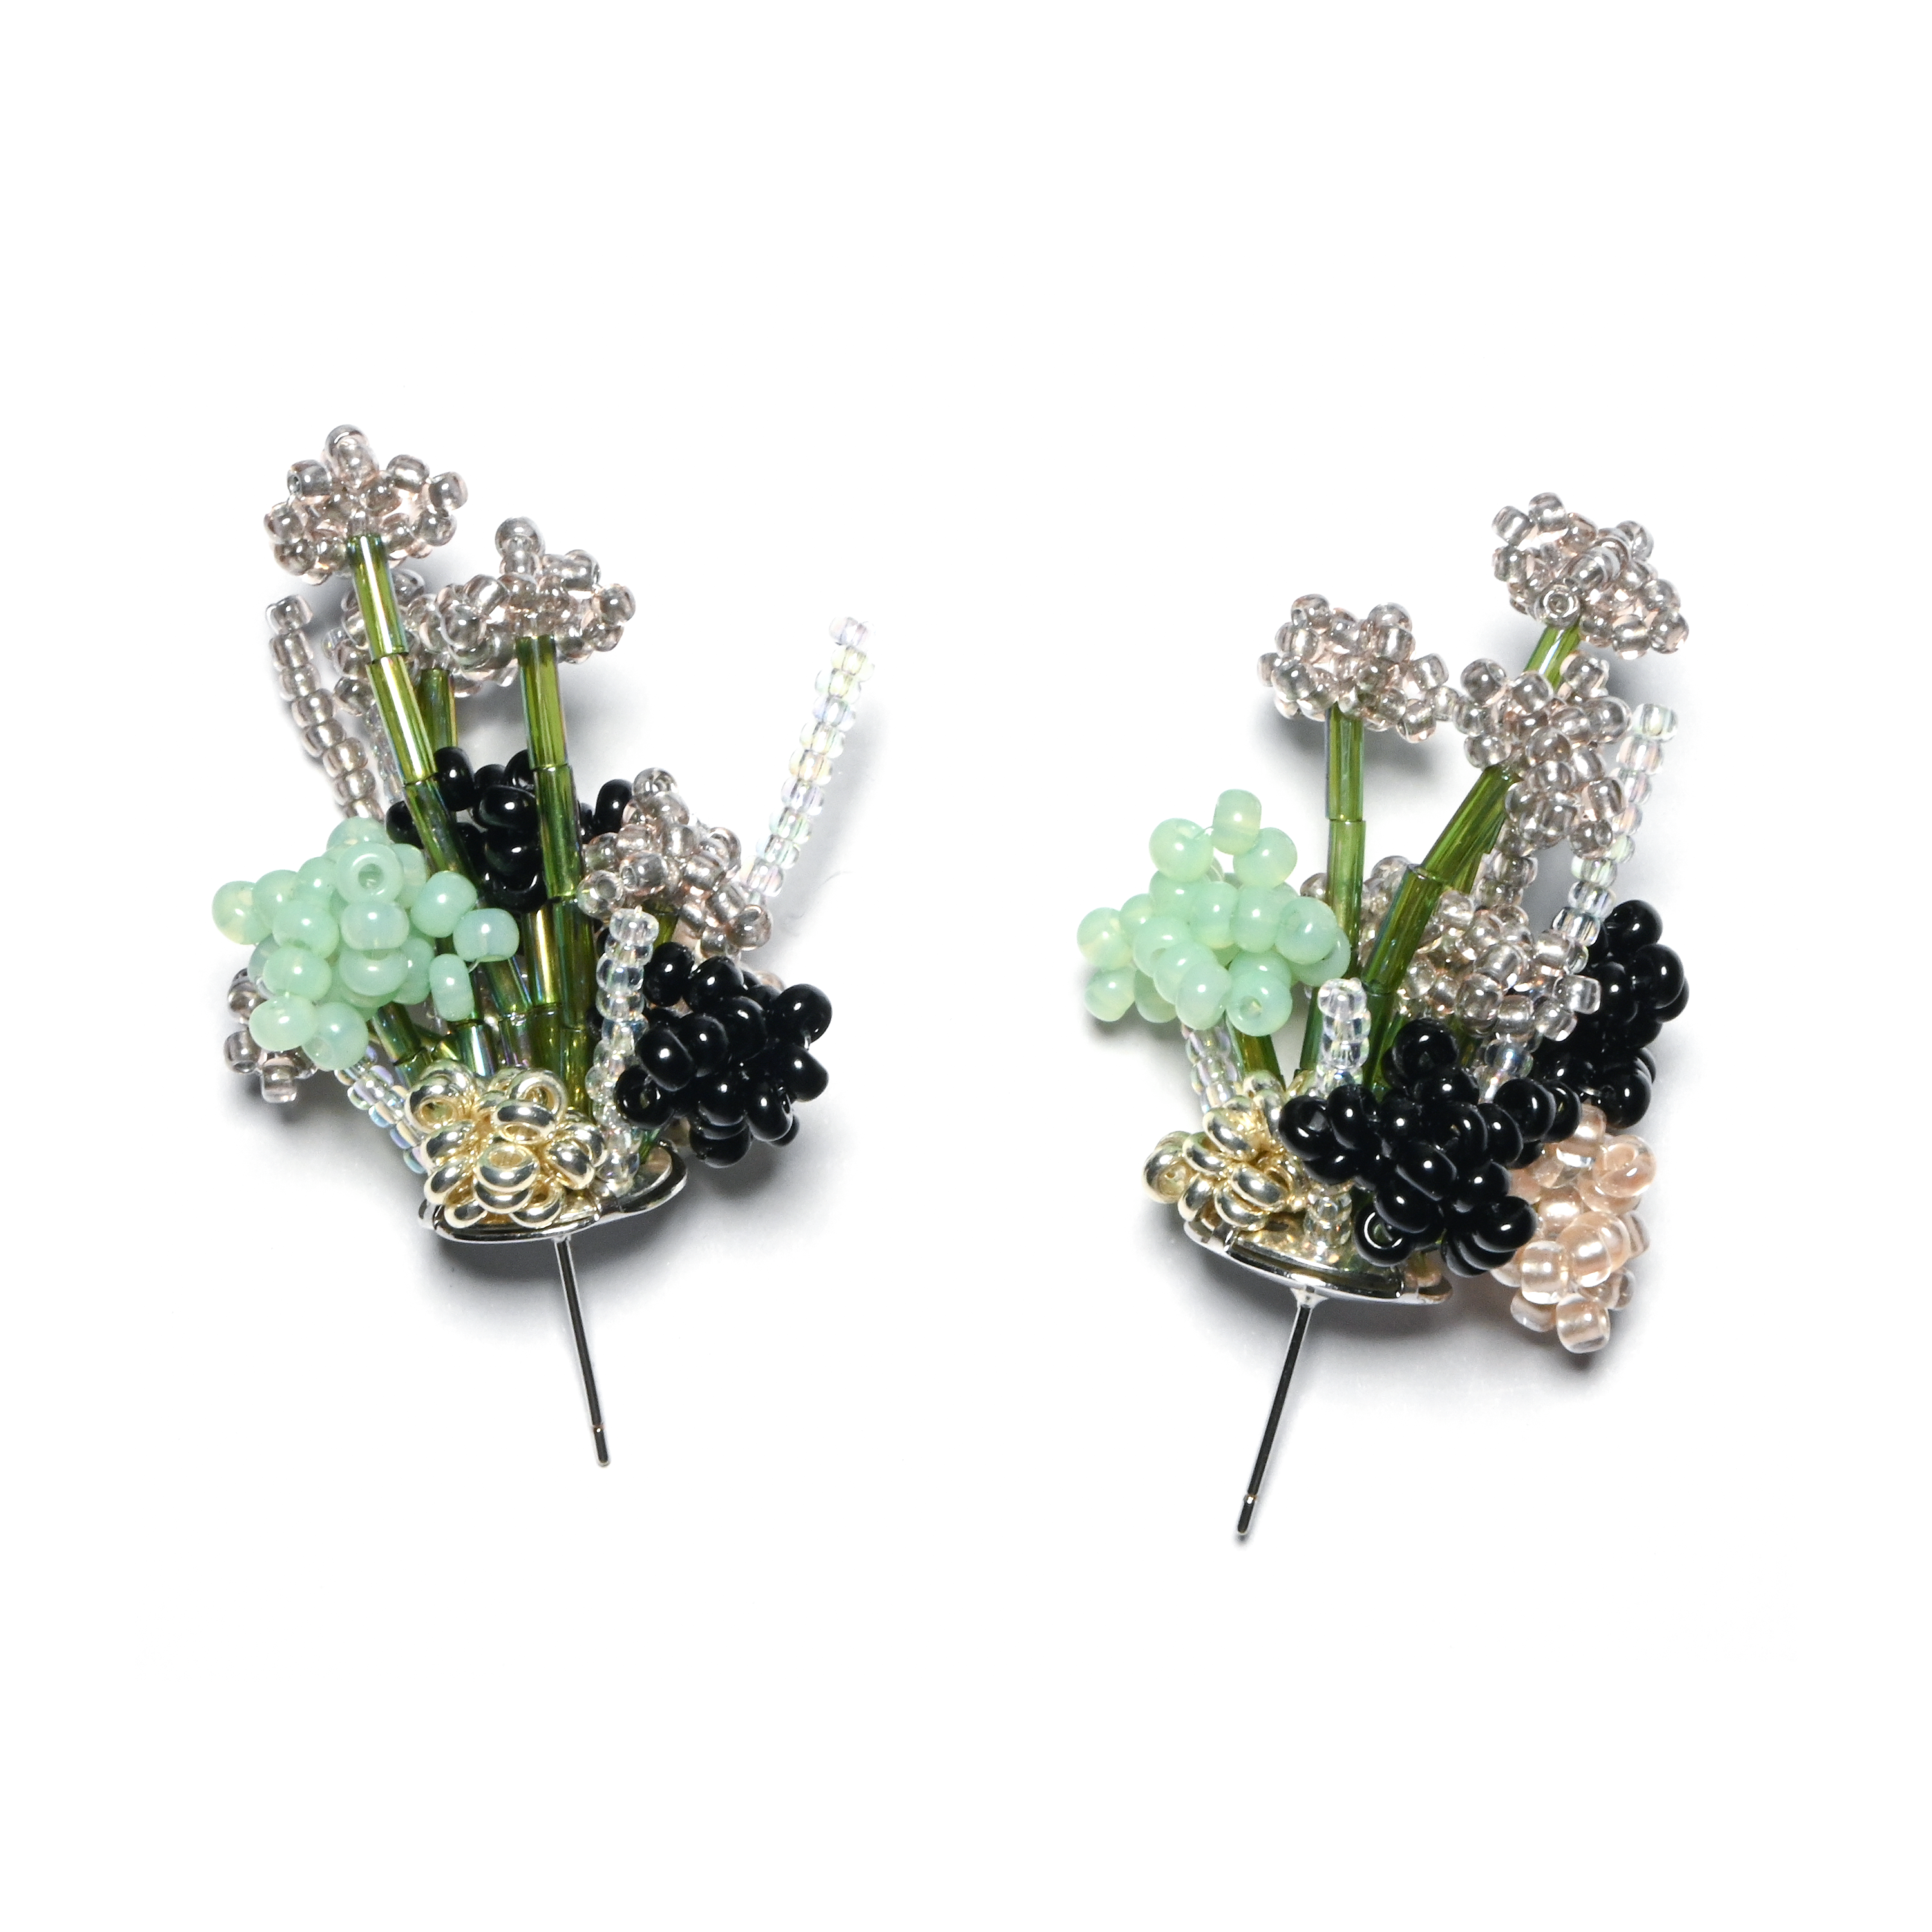 Handmade Beaded Cabbage Shaped Earrings With Ceramic Beads 14k Gold 925 Silver Floral Shape